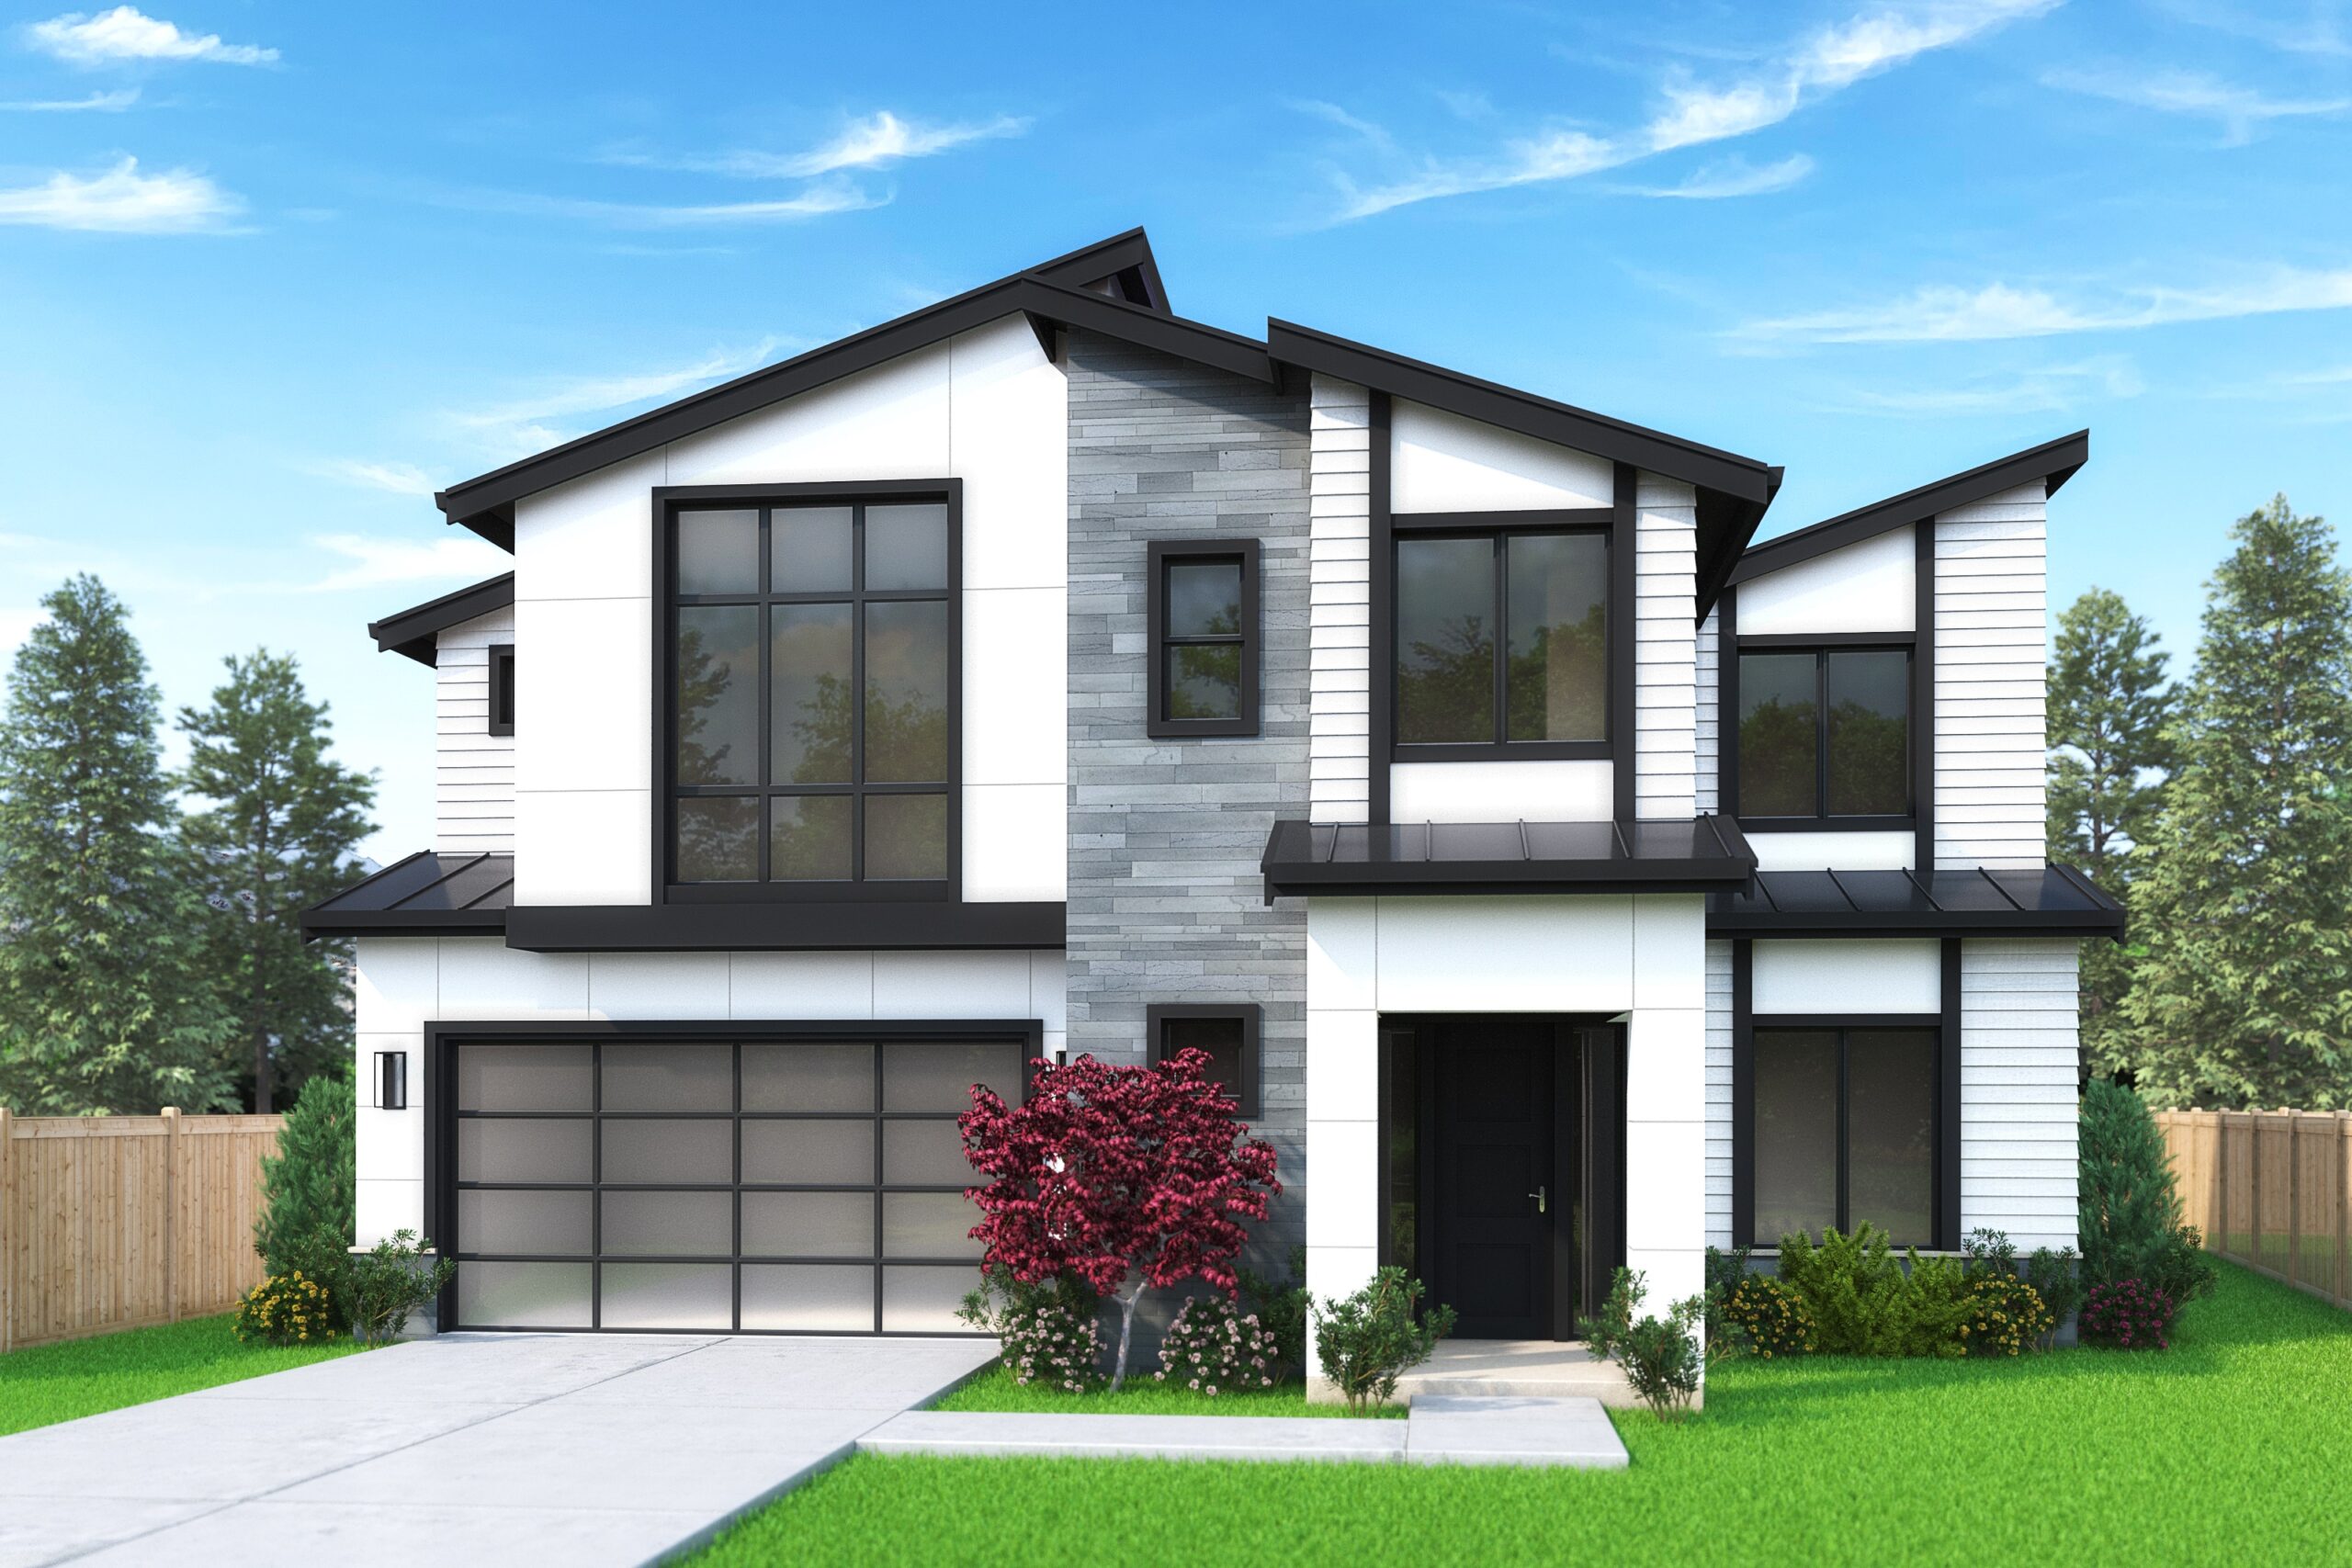 View our new luxury home construction on 12646 SE 7th PL, in Bellevue, WA from MN Custom Homes